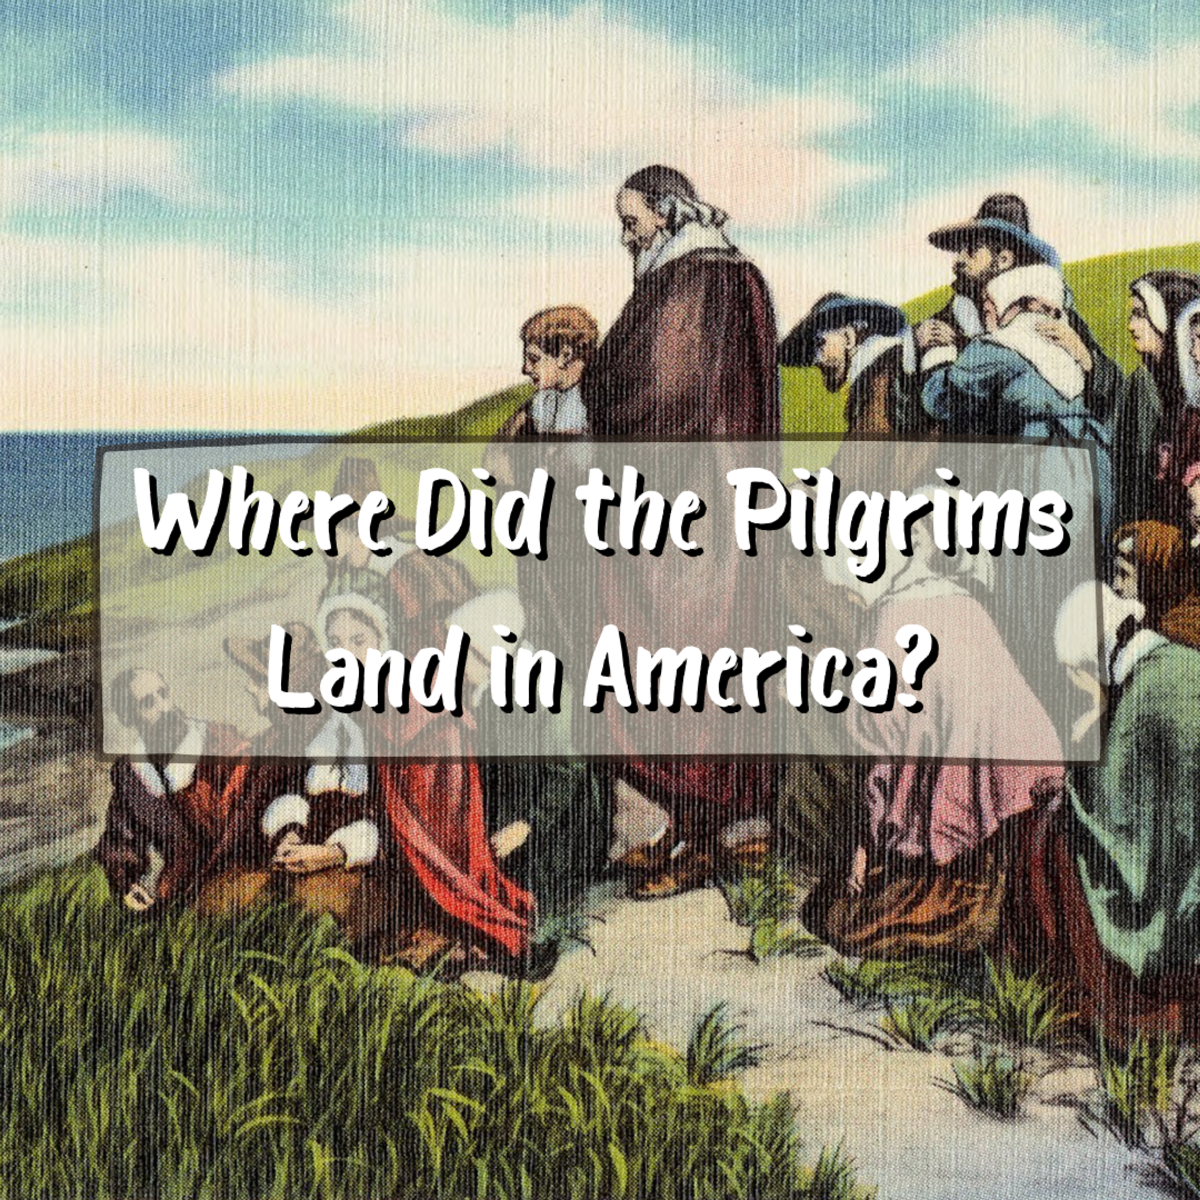 Where Did the Pilgrims Land in America?